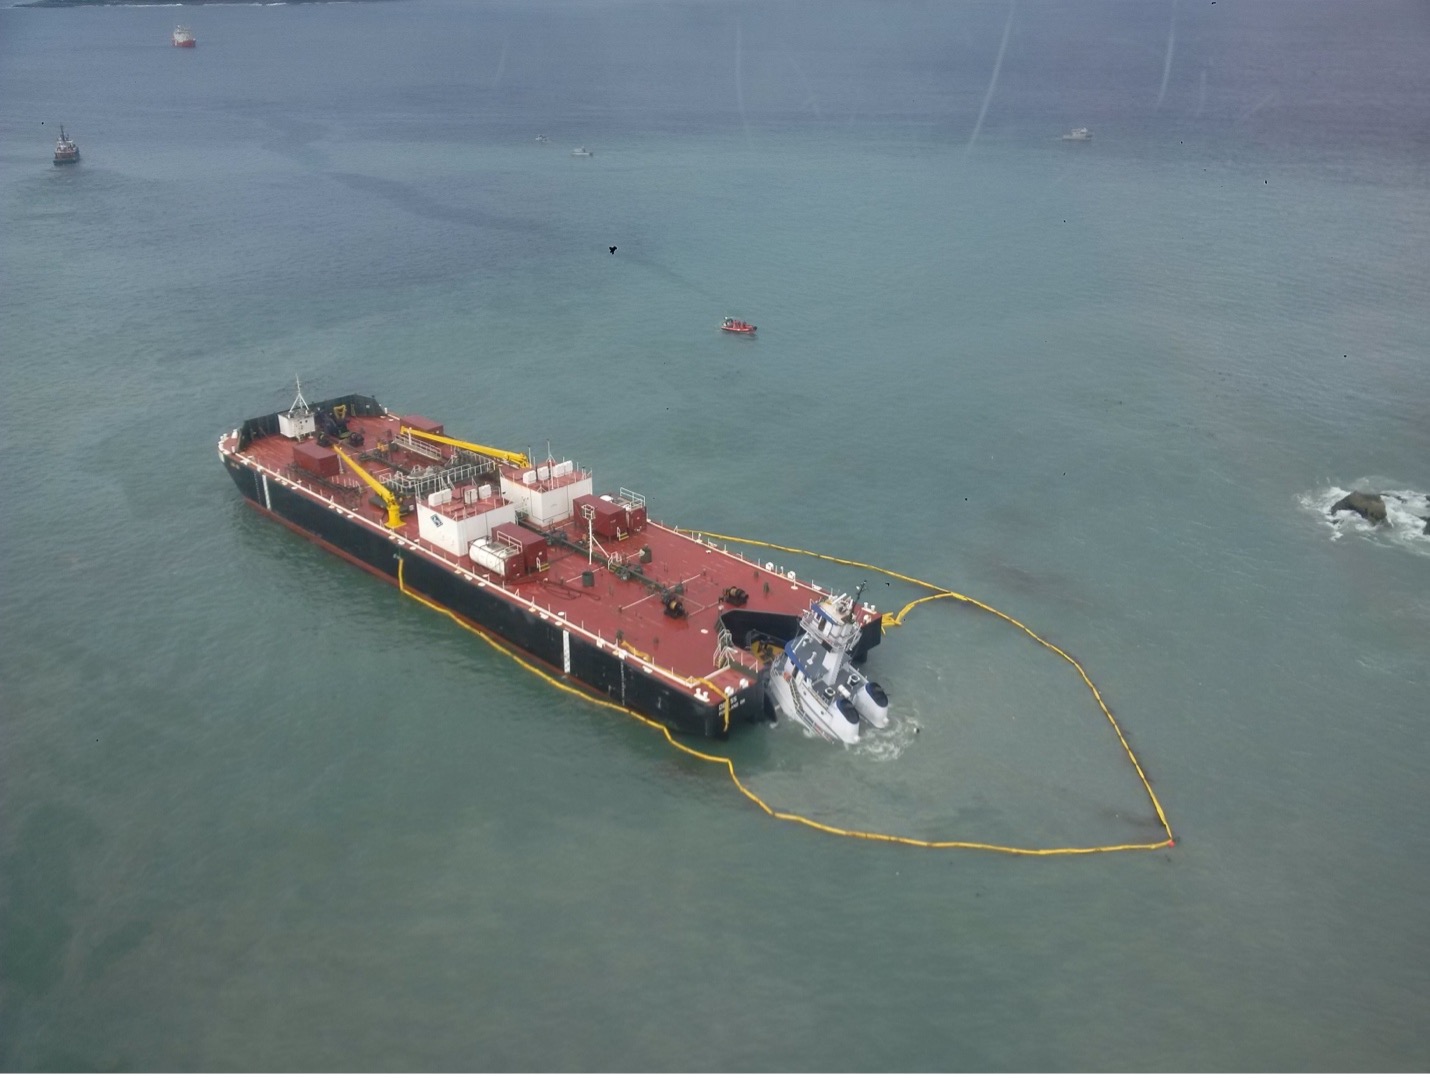 The Nathan E. Steward articulated tug during the oil spill response and salvage operations